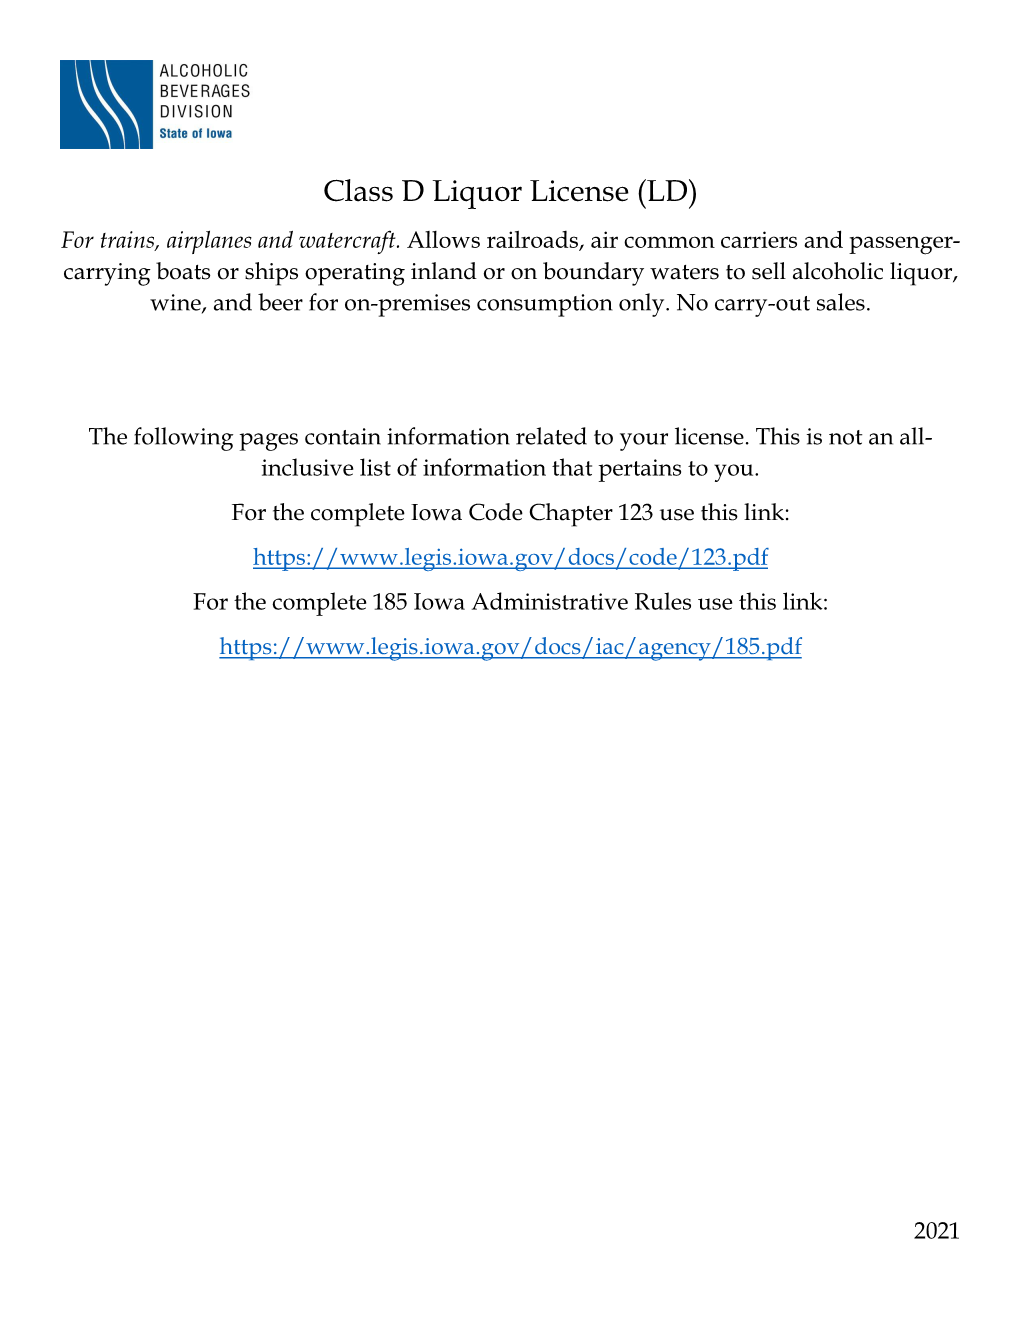 Class D Liquor License (LD) for Trains, Airplanes and Watercraft